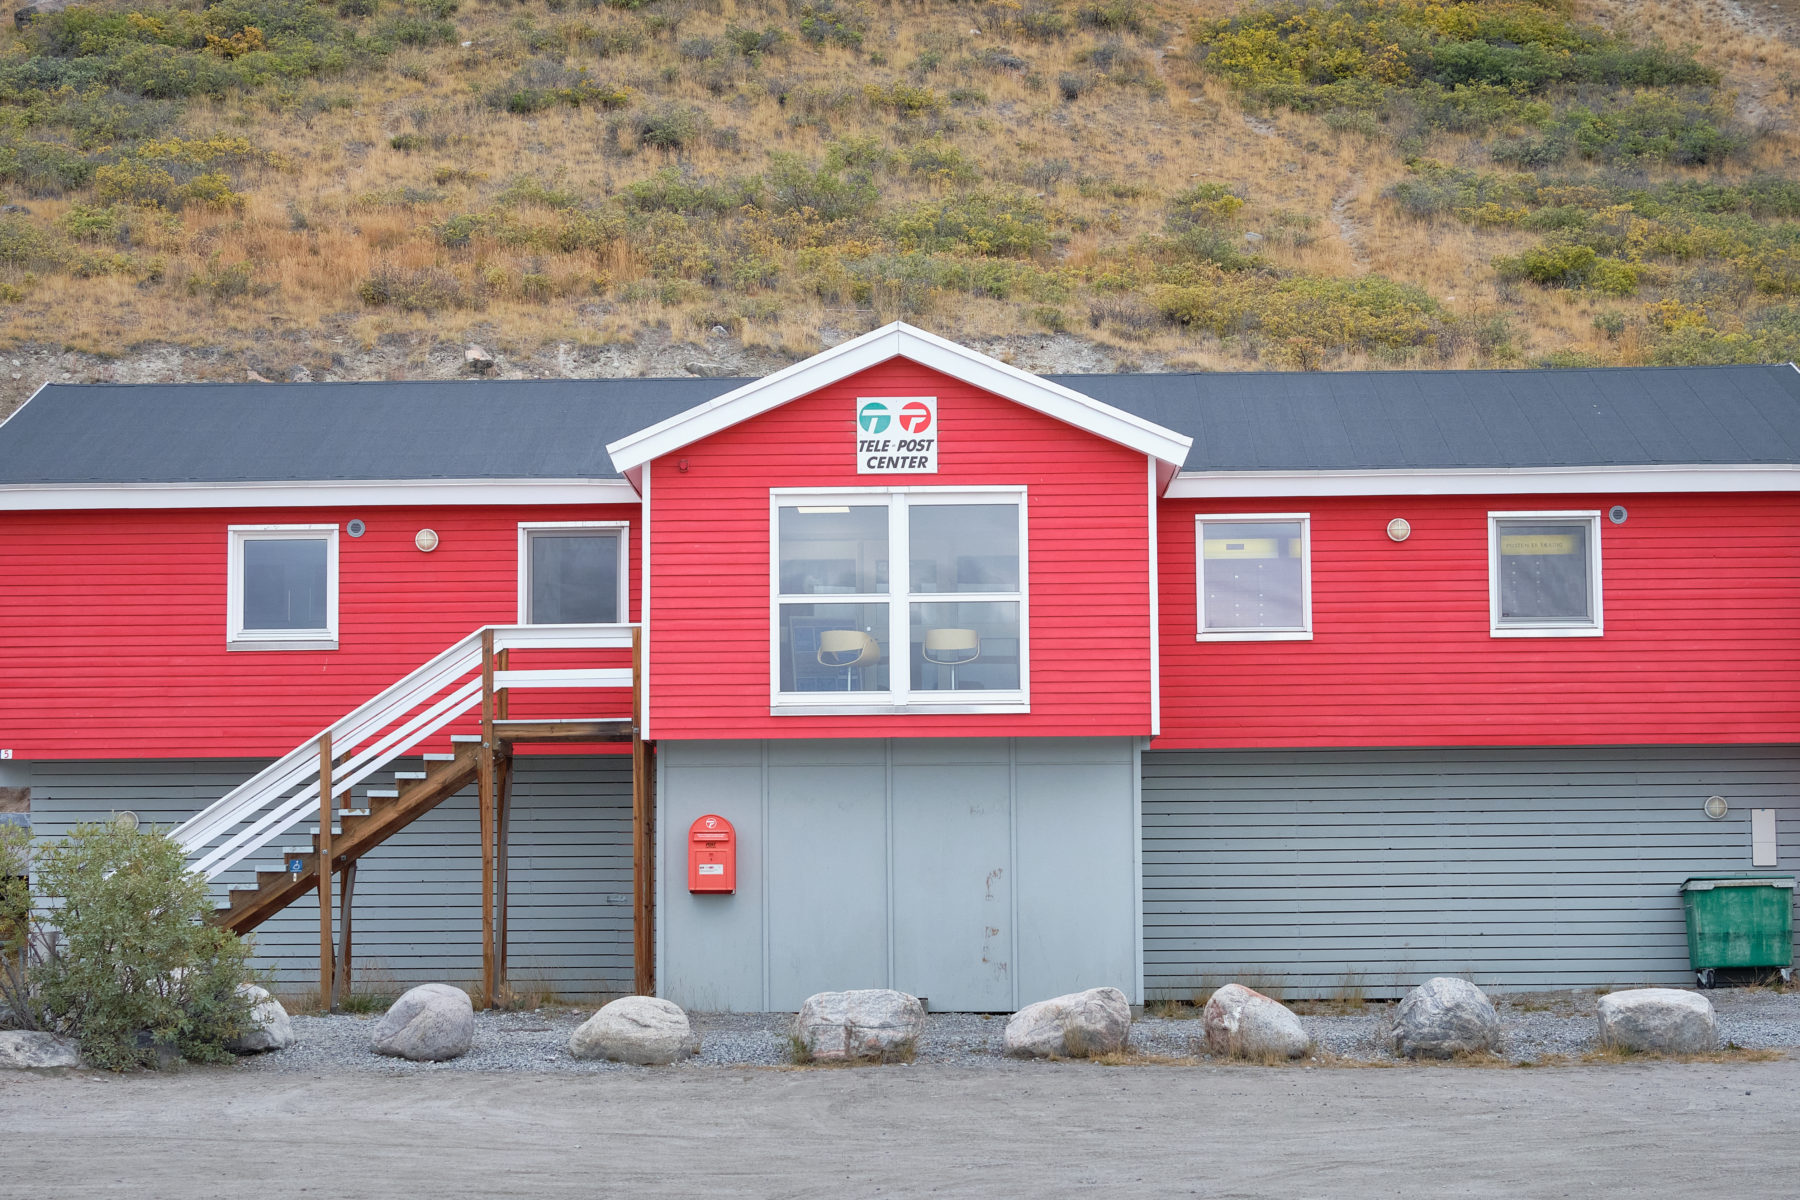 The Post Office and telecommunications company in Greenland is called Tusass. You can send gear to the other end of the trail here